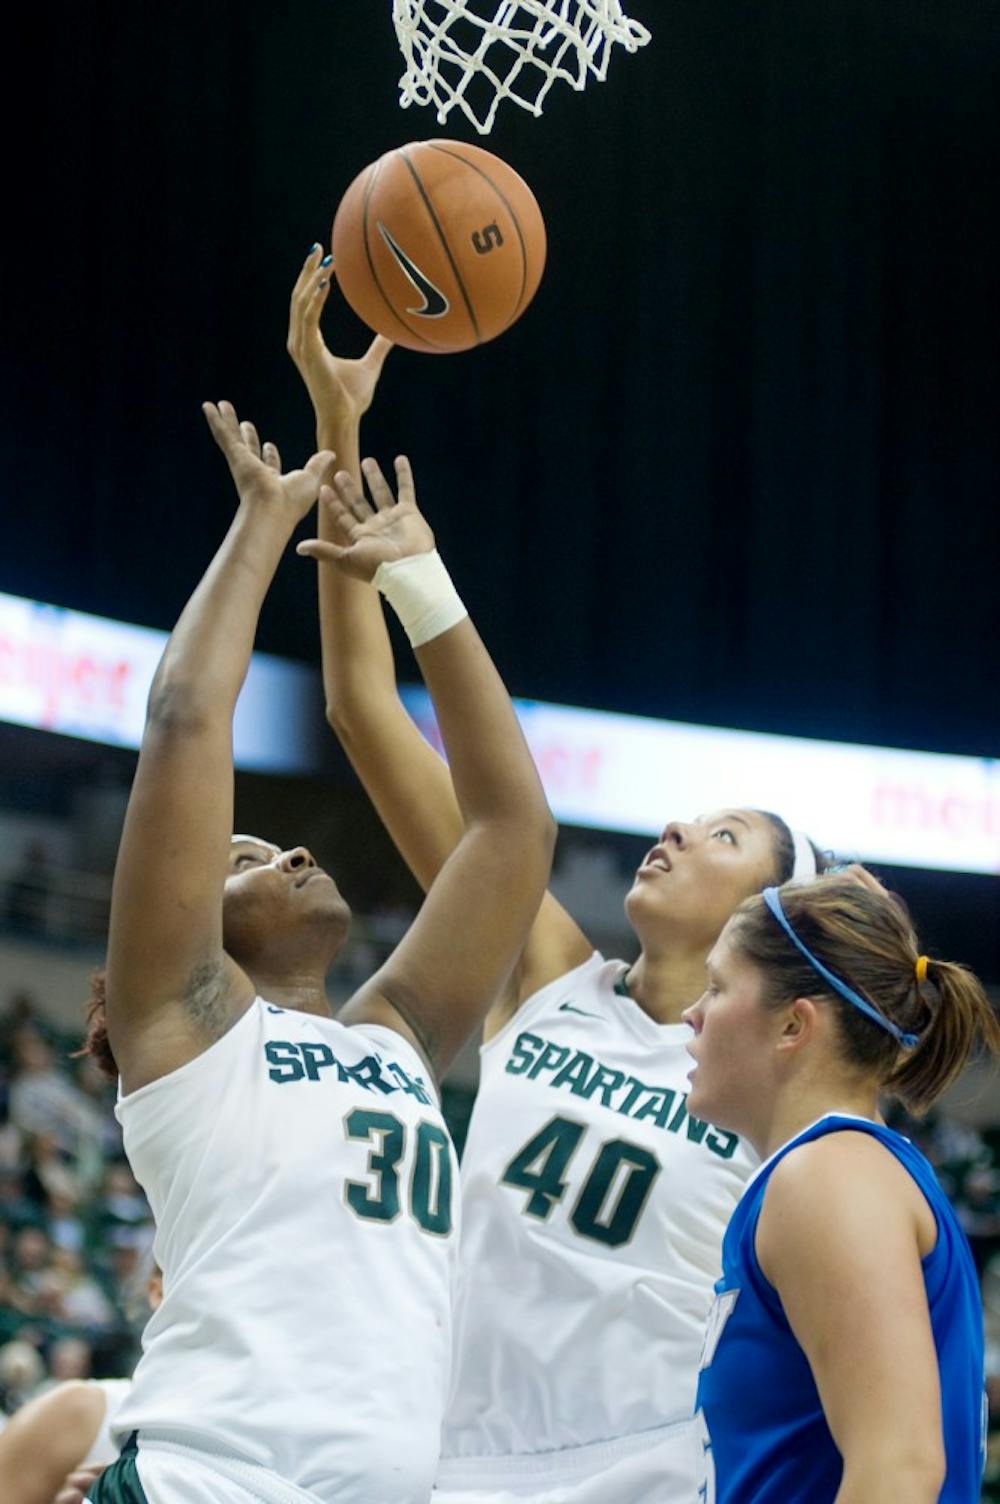 Senior forward Lykendra Johnson and red-shirt freshman forward Madison Williams both go up for a rebound during the first half of Tuesday's game at Breslin Center. Lauren Wood/The State News